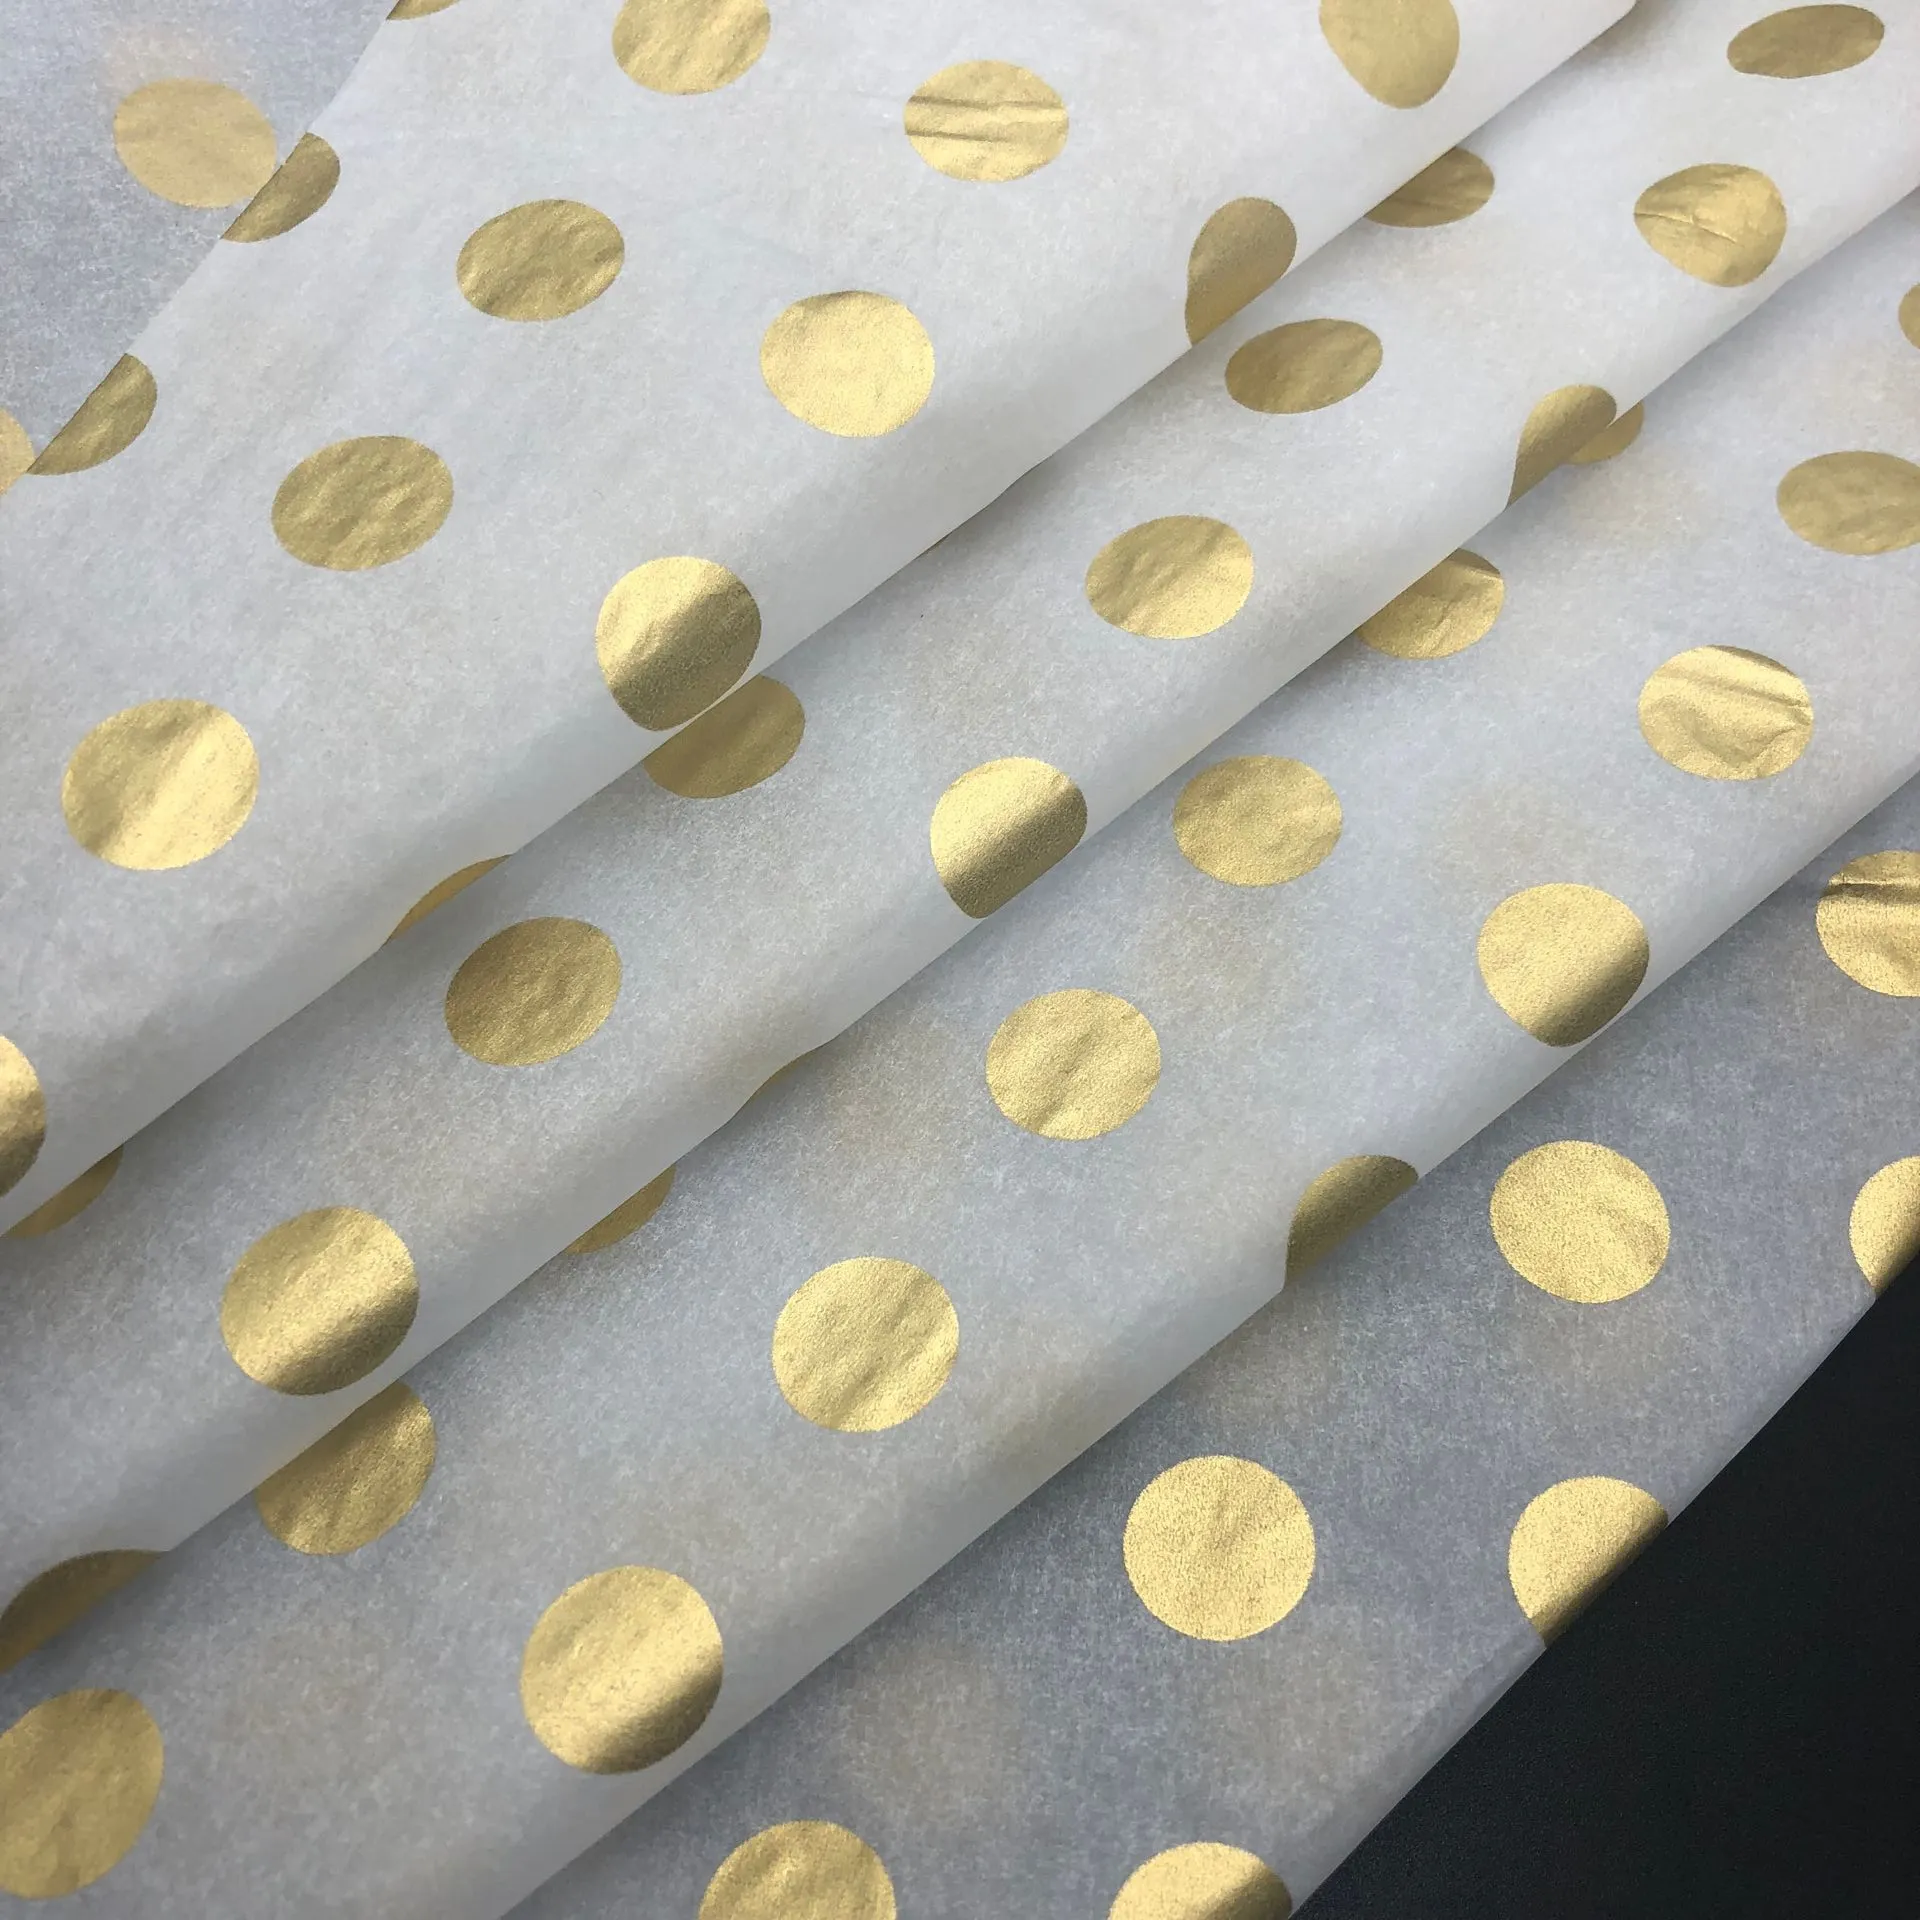 Good Price Wholesale Luxurious Eco-friendly Scented Polka Dot Acid Free Printed Tissue Paper for Candle